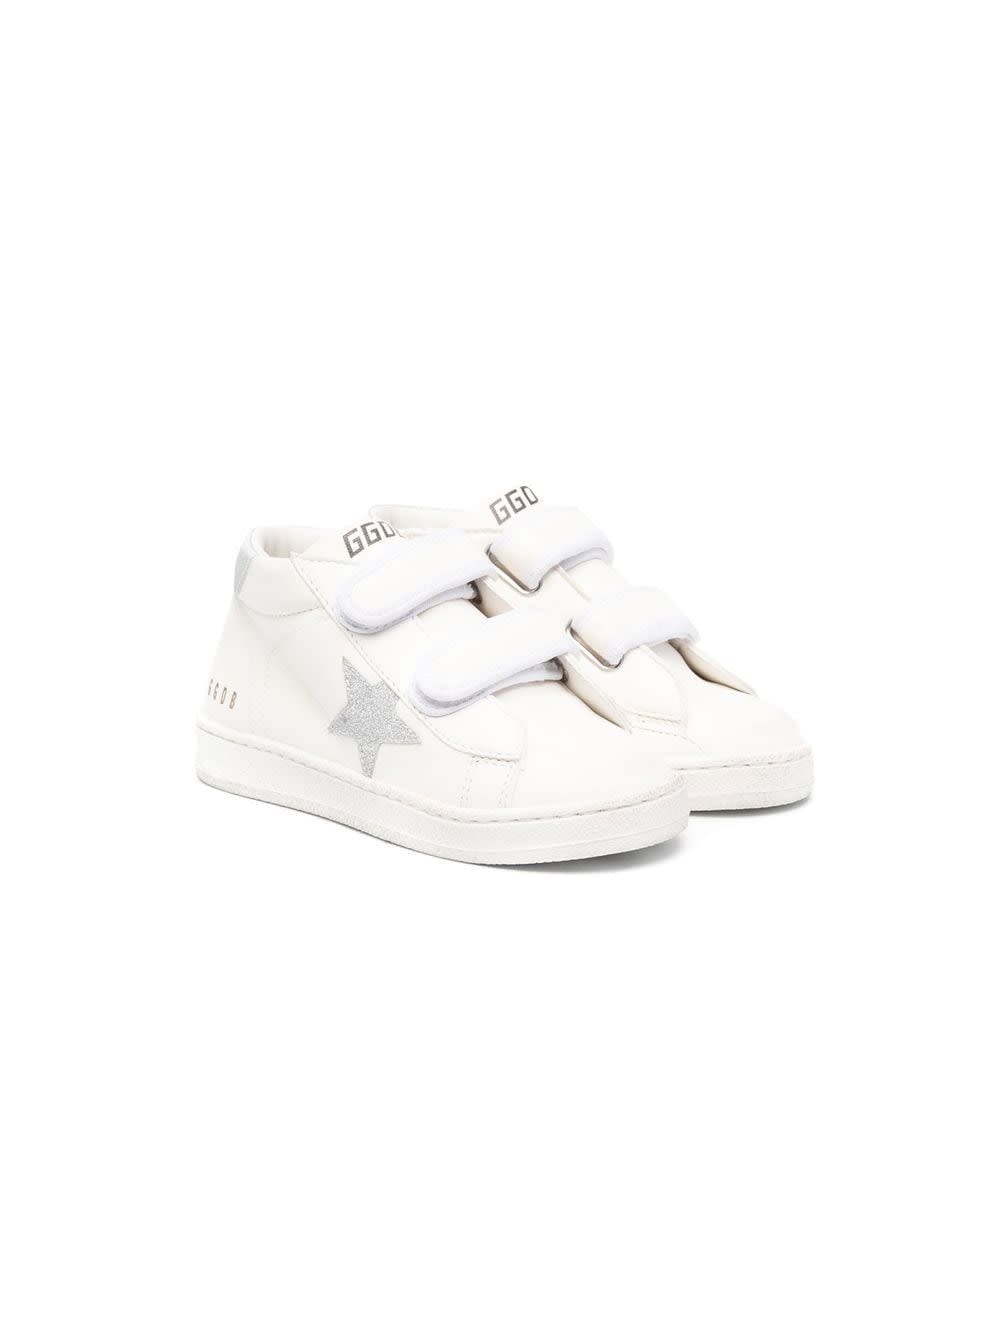 Golden Goose Kids' White Leather Sneakers In Bianco+argento